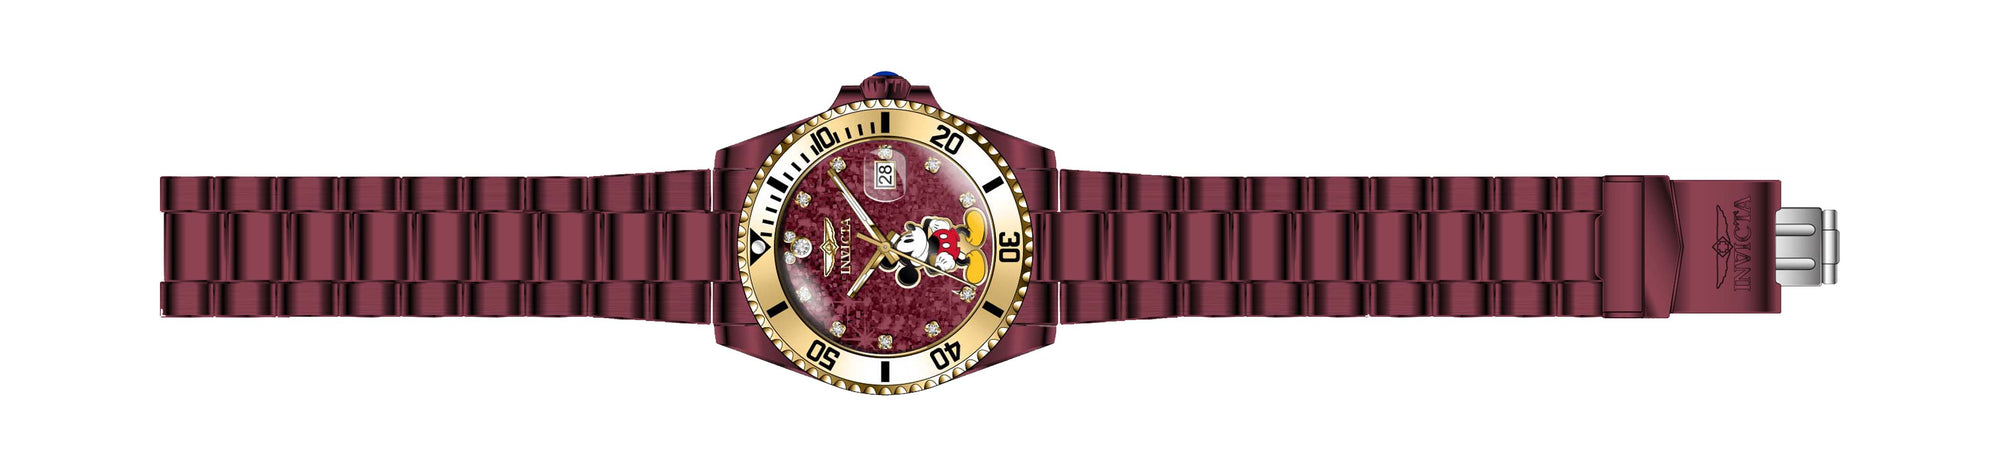 Band for Invicta Disney Limited Edition Mickey Mouse Lady 41216